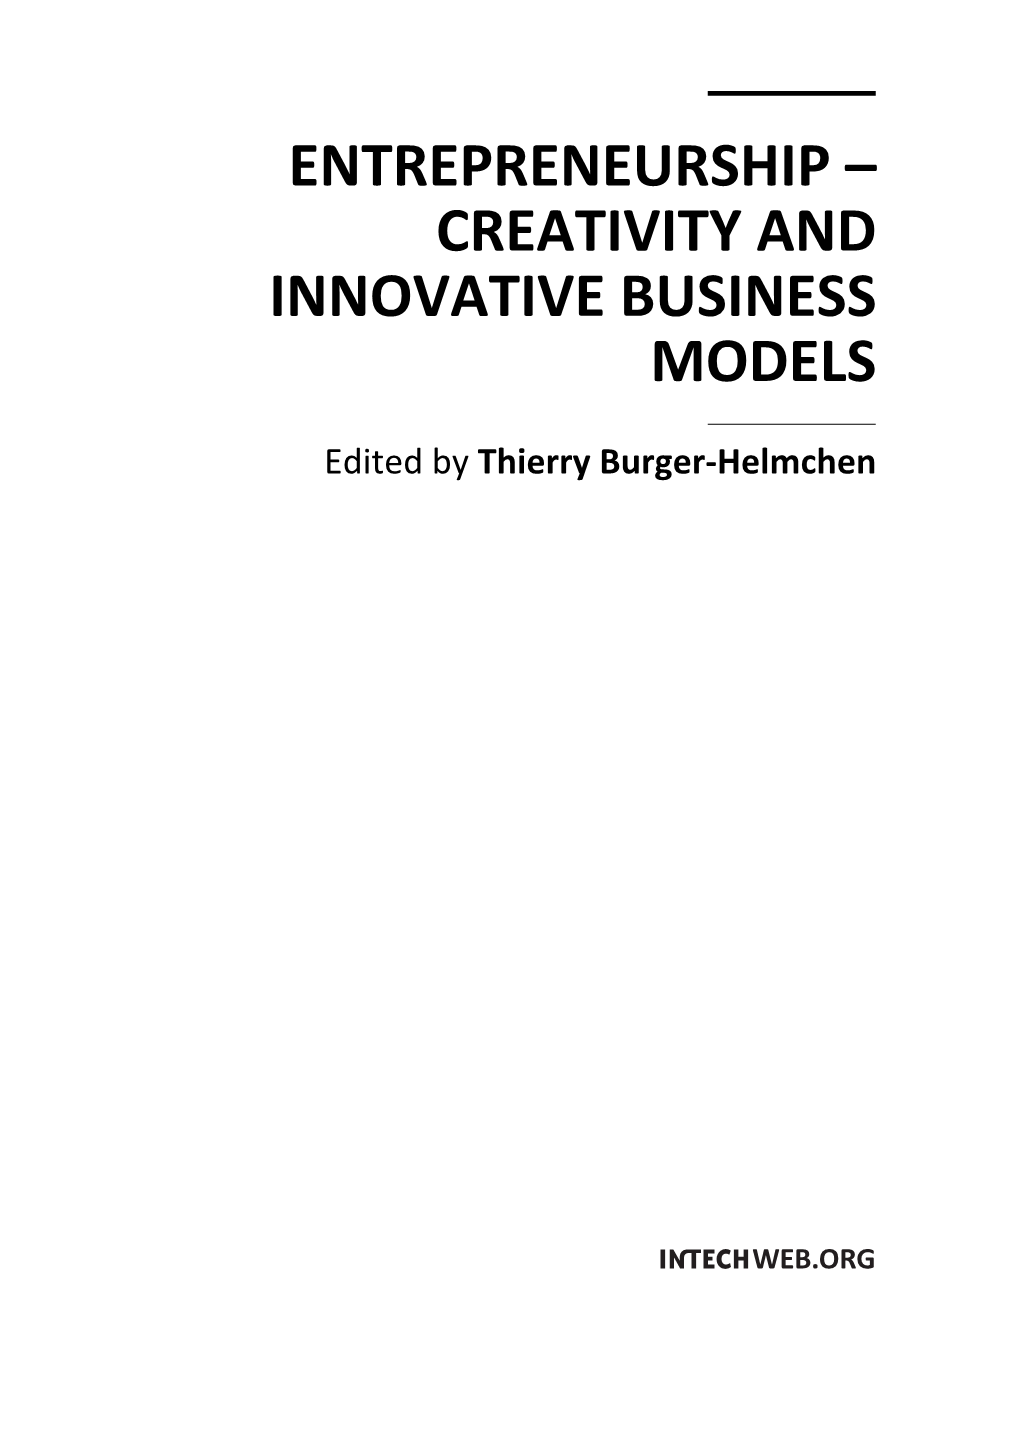 Creativity and Innovative Business Models